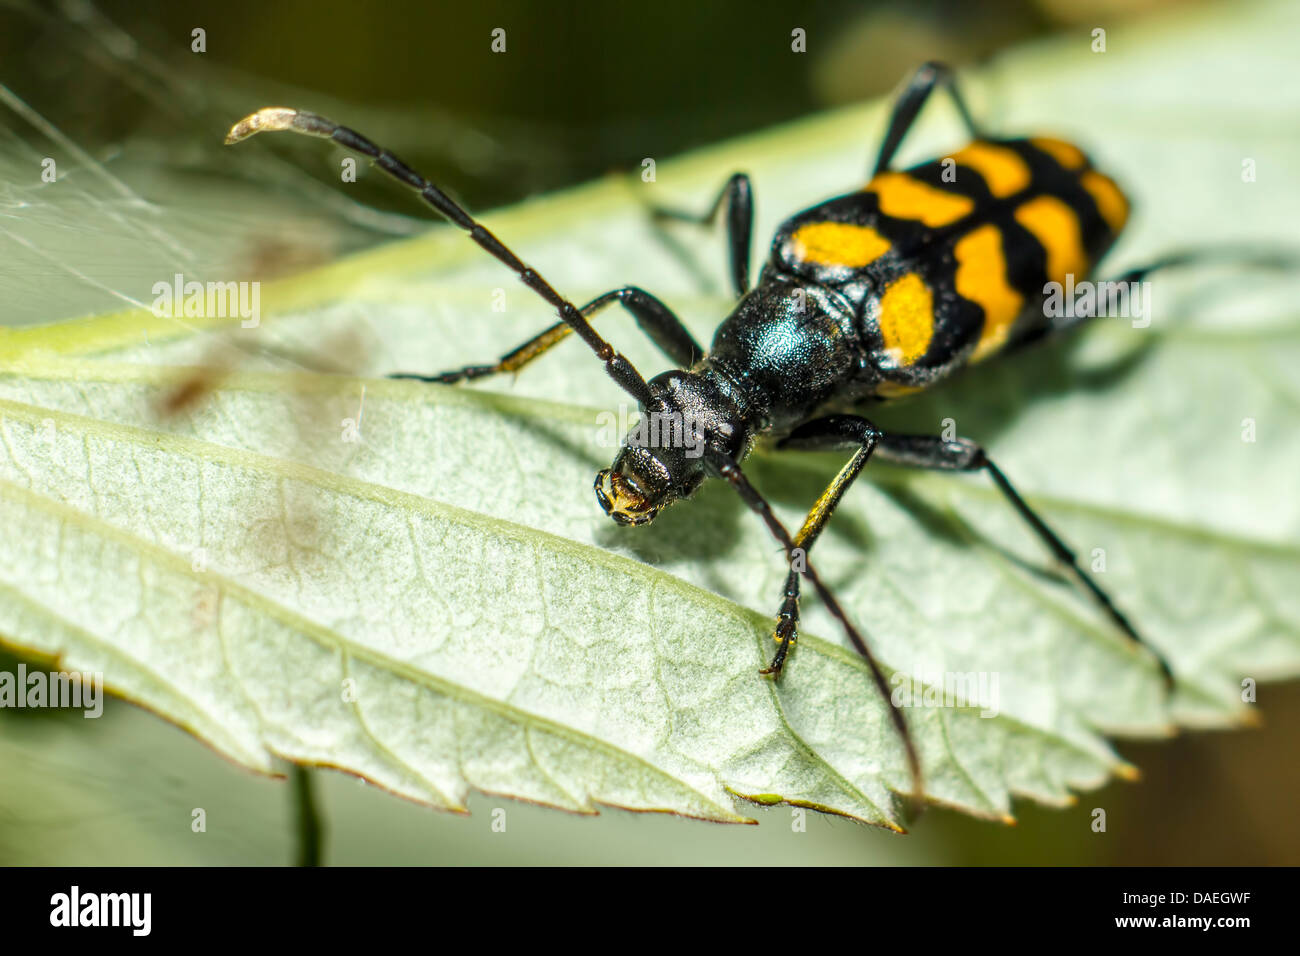 The black spotted beetle Stock Photo